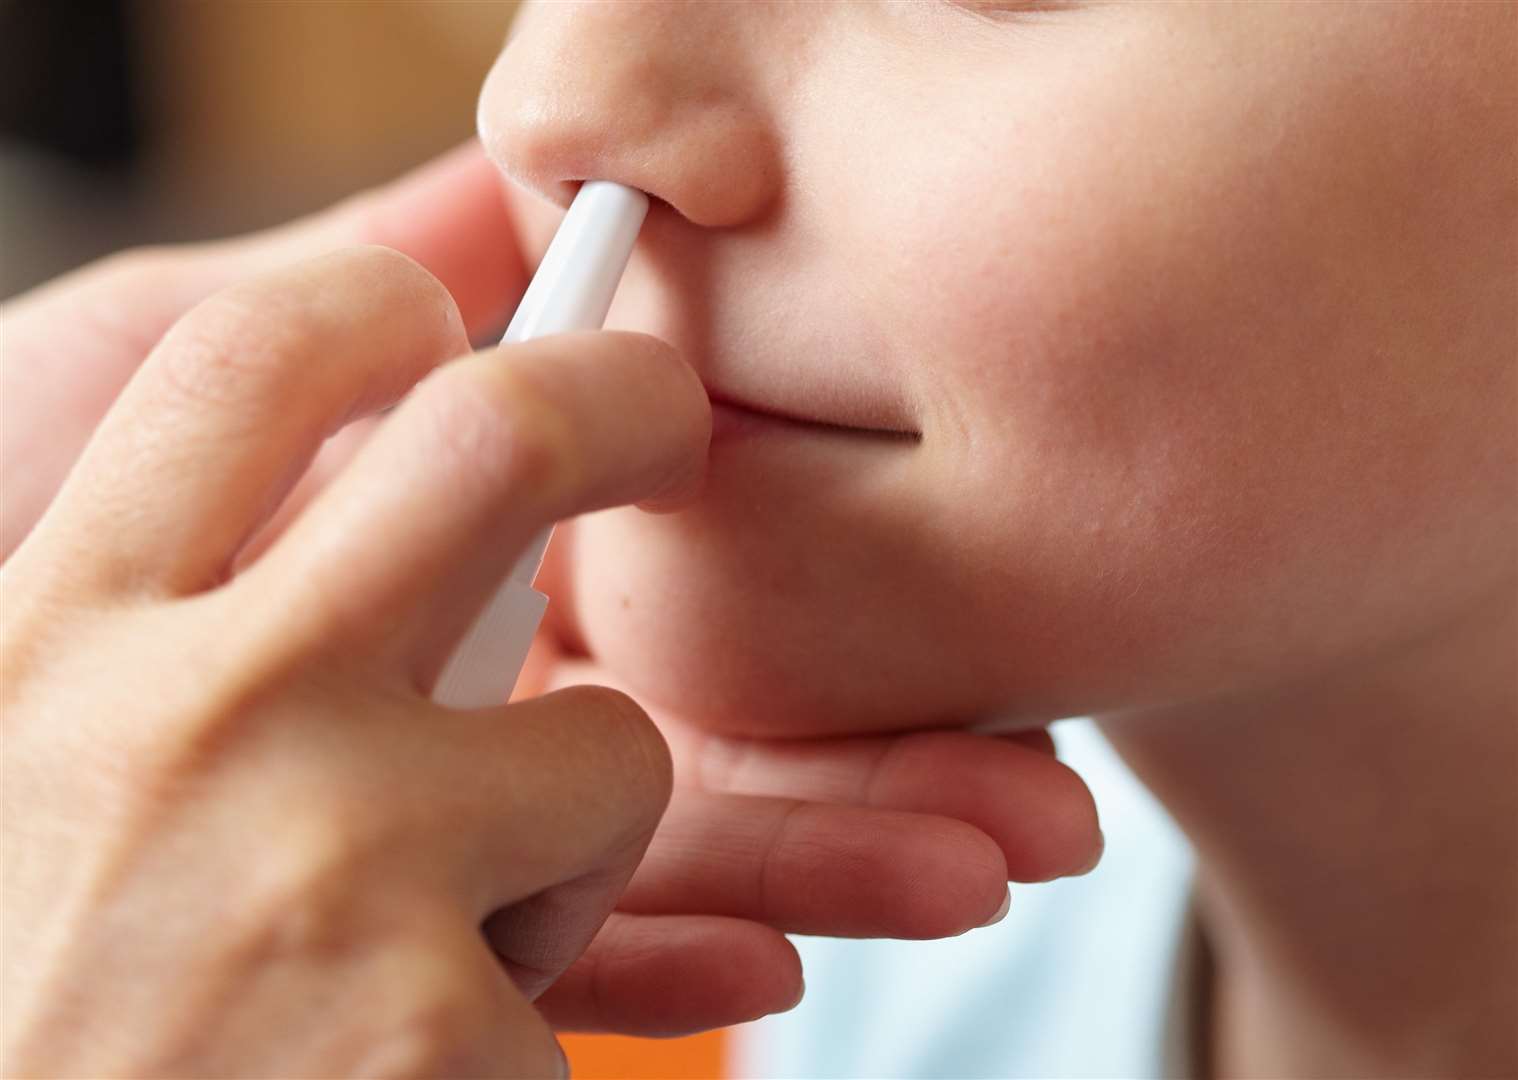 The flu vaccine for most children is offered as a nasal spray